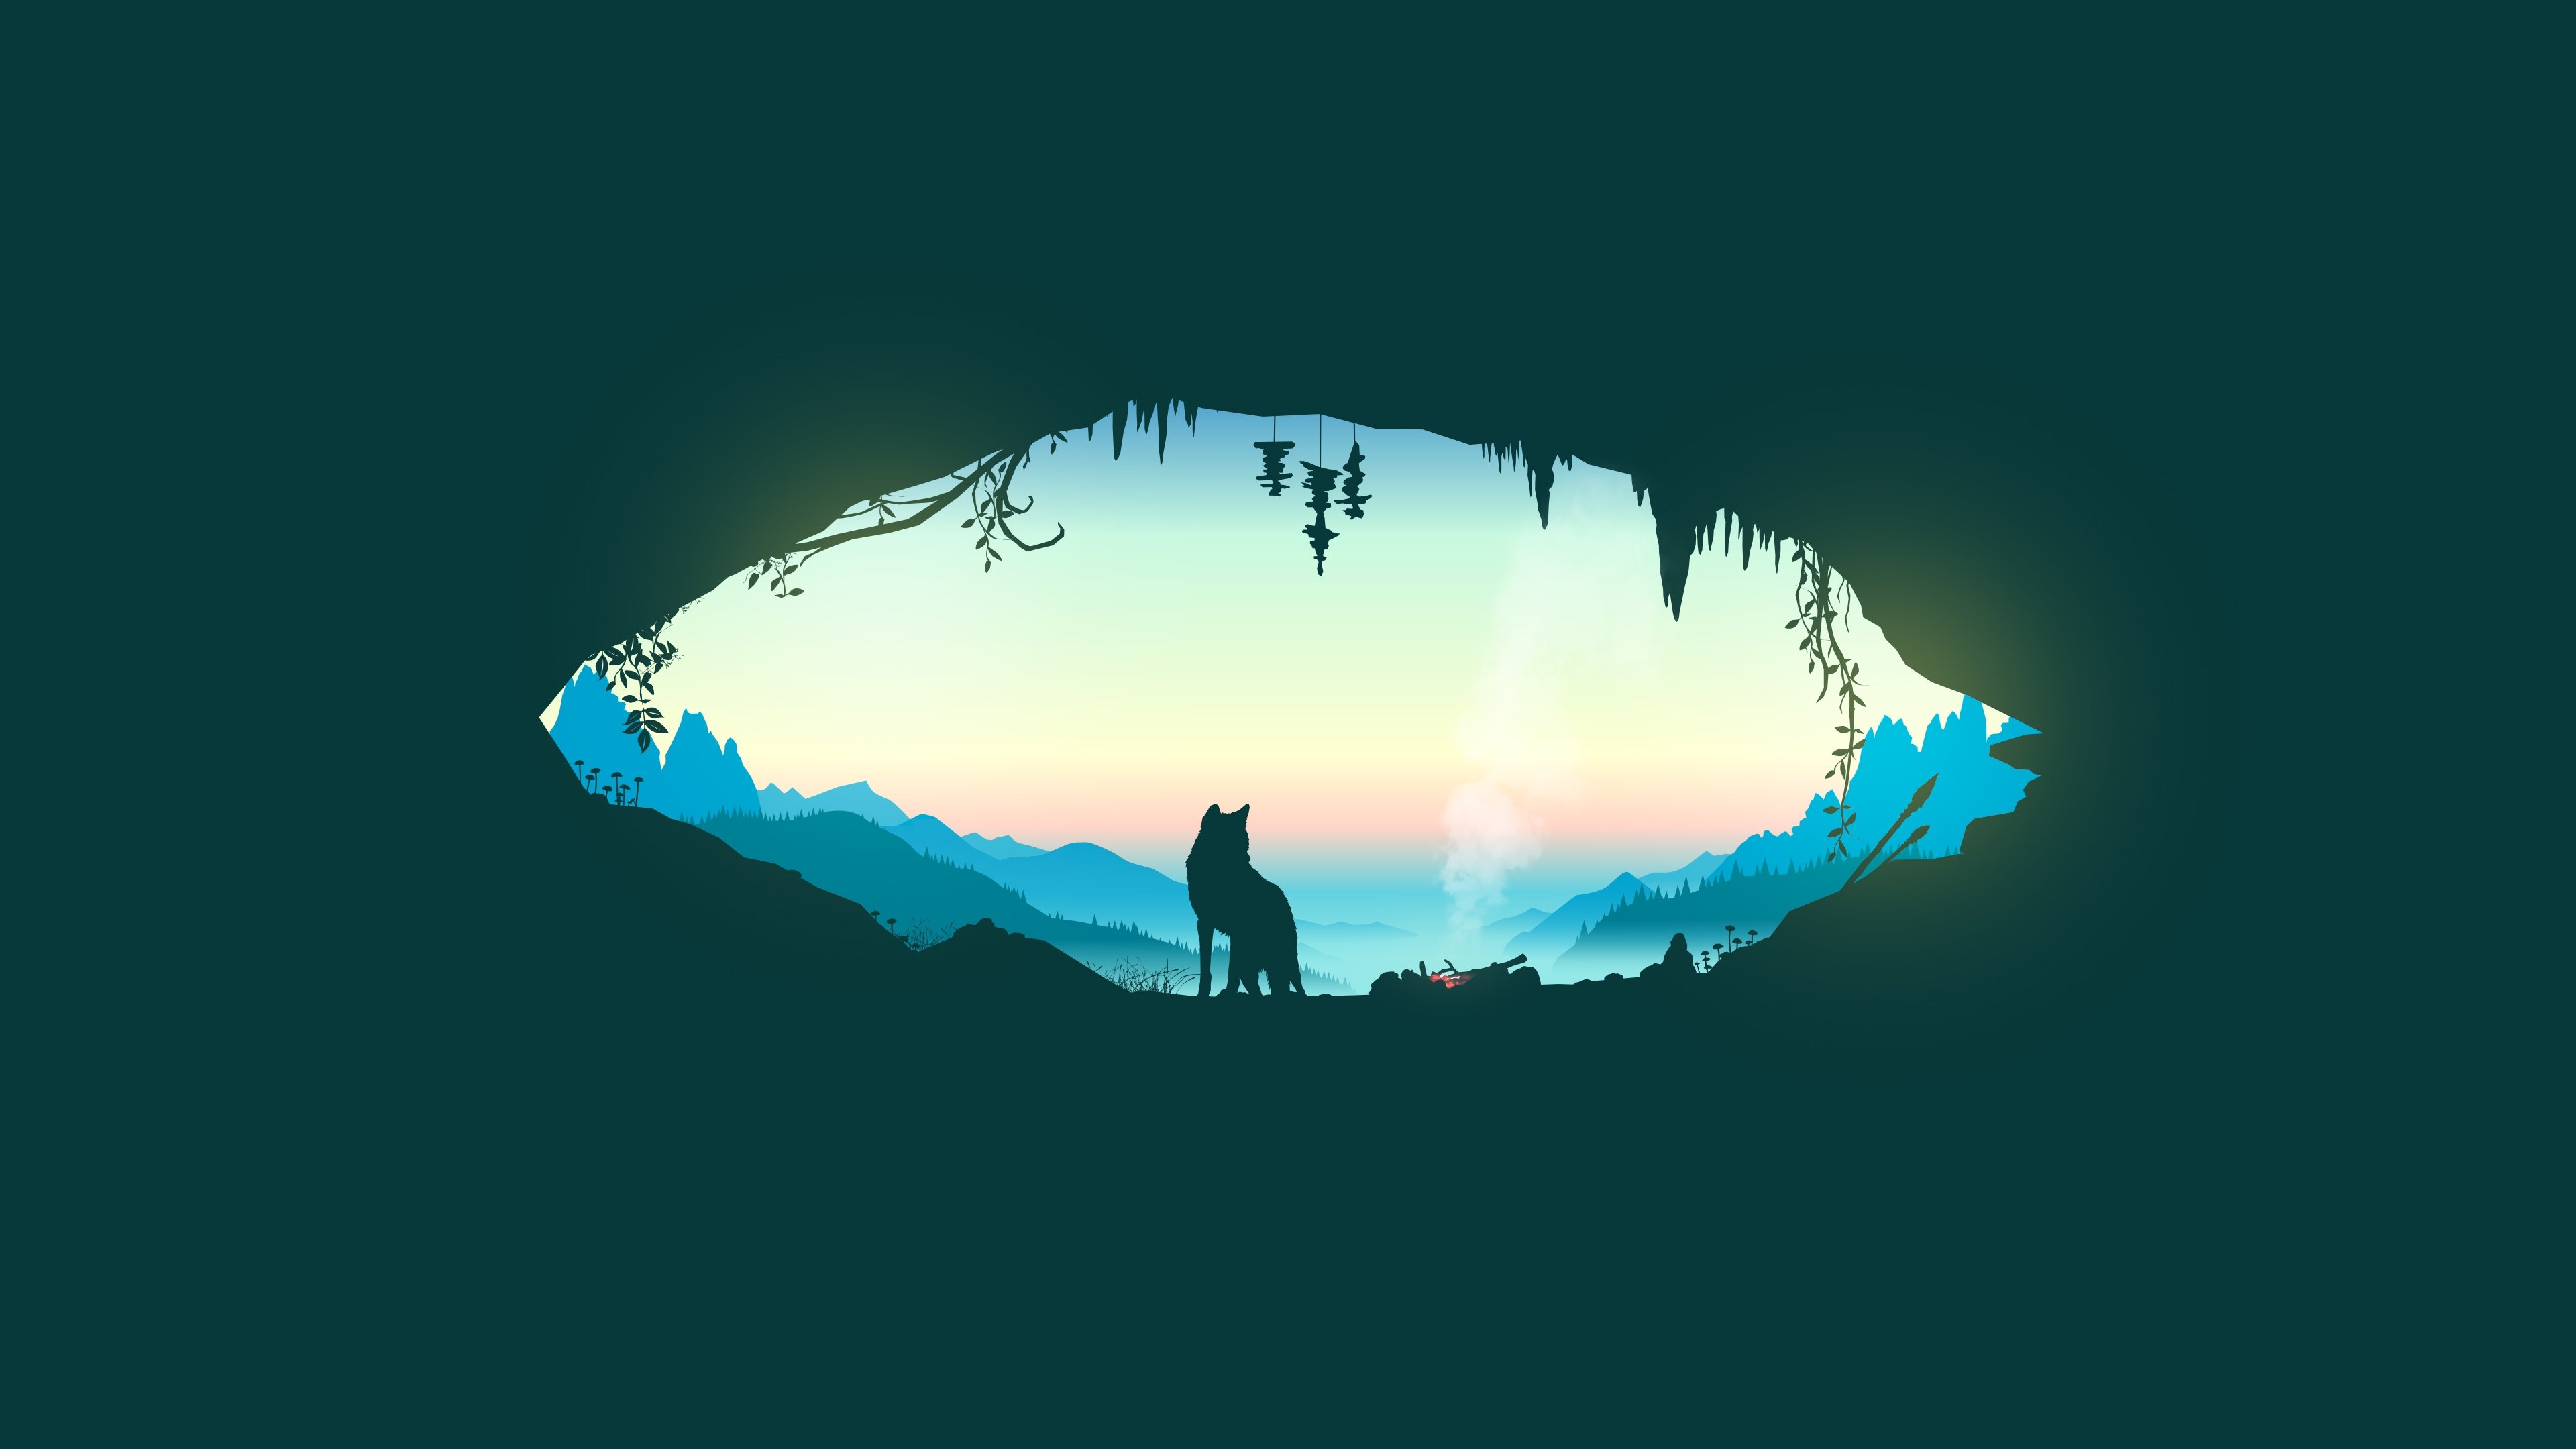 Raised By Wolves Minimal Art Wallpapers